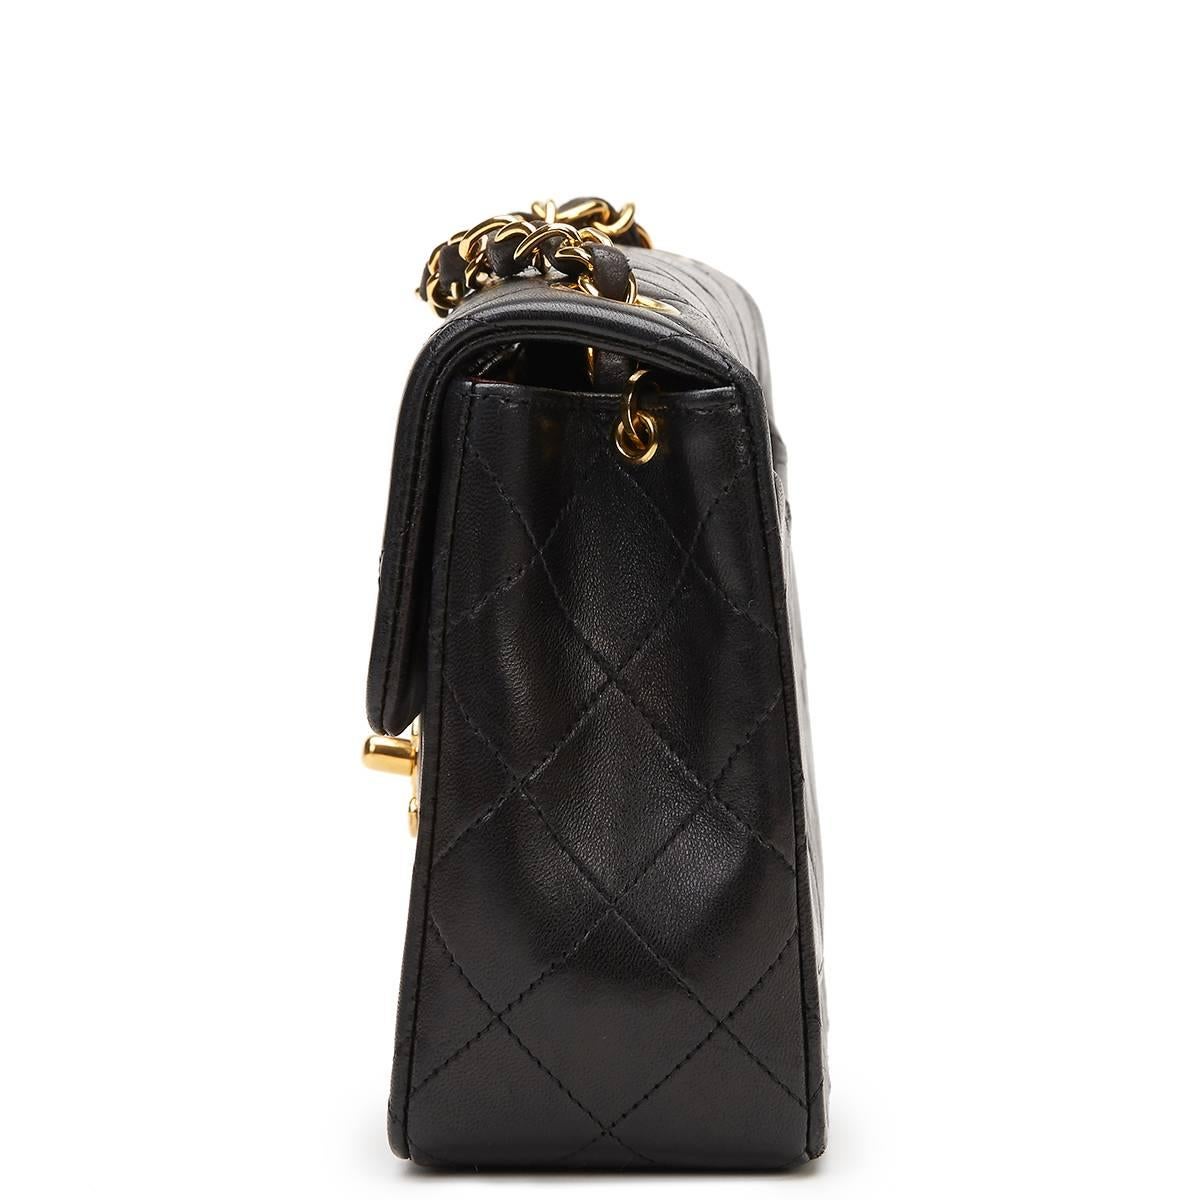 CHANEL
Black Quilted Lambskin Vintage Mini Flap Bag

This CHANEL Mini Flap Bag is in Excellent Pre-Owned Condition accompanied by Chanel Dust Bag, Box, Authenticity Card. Circa 1994. Primarily made from Lambskin Leather complimented by Gold